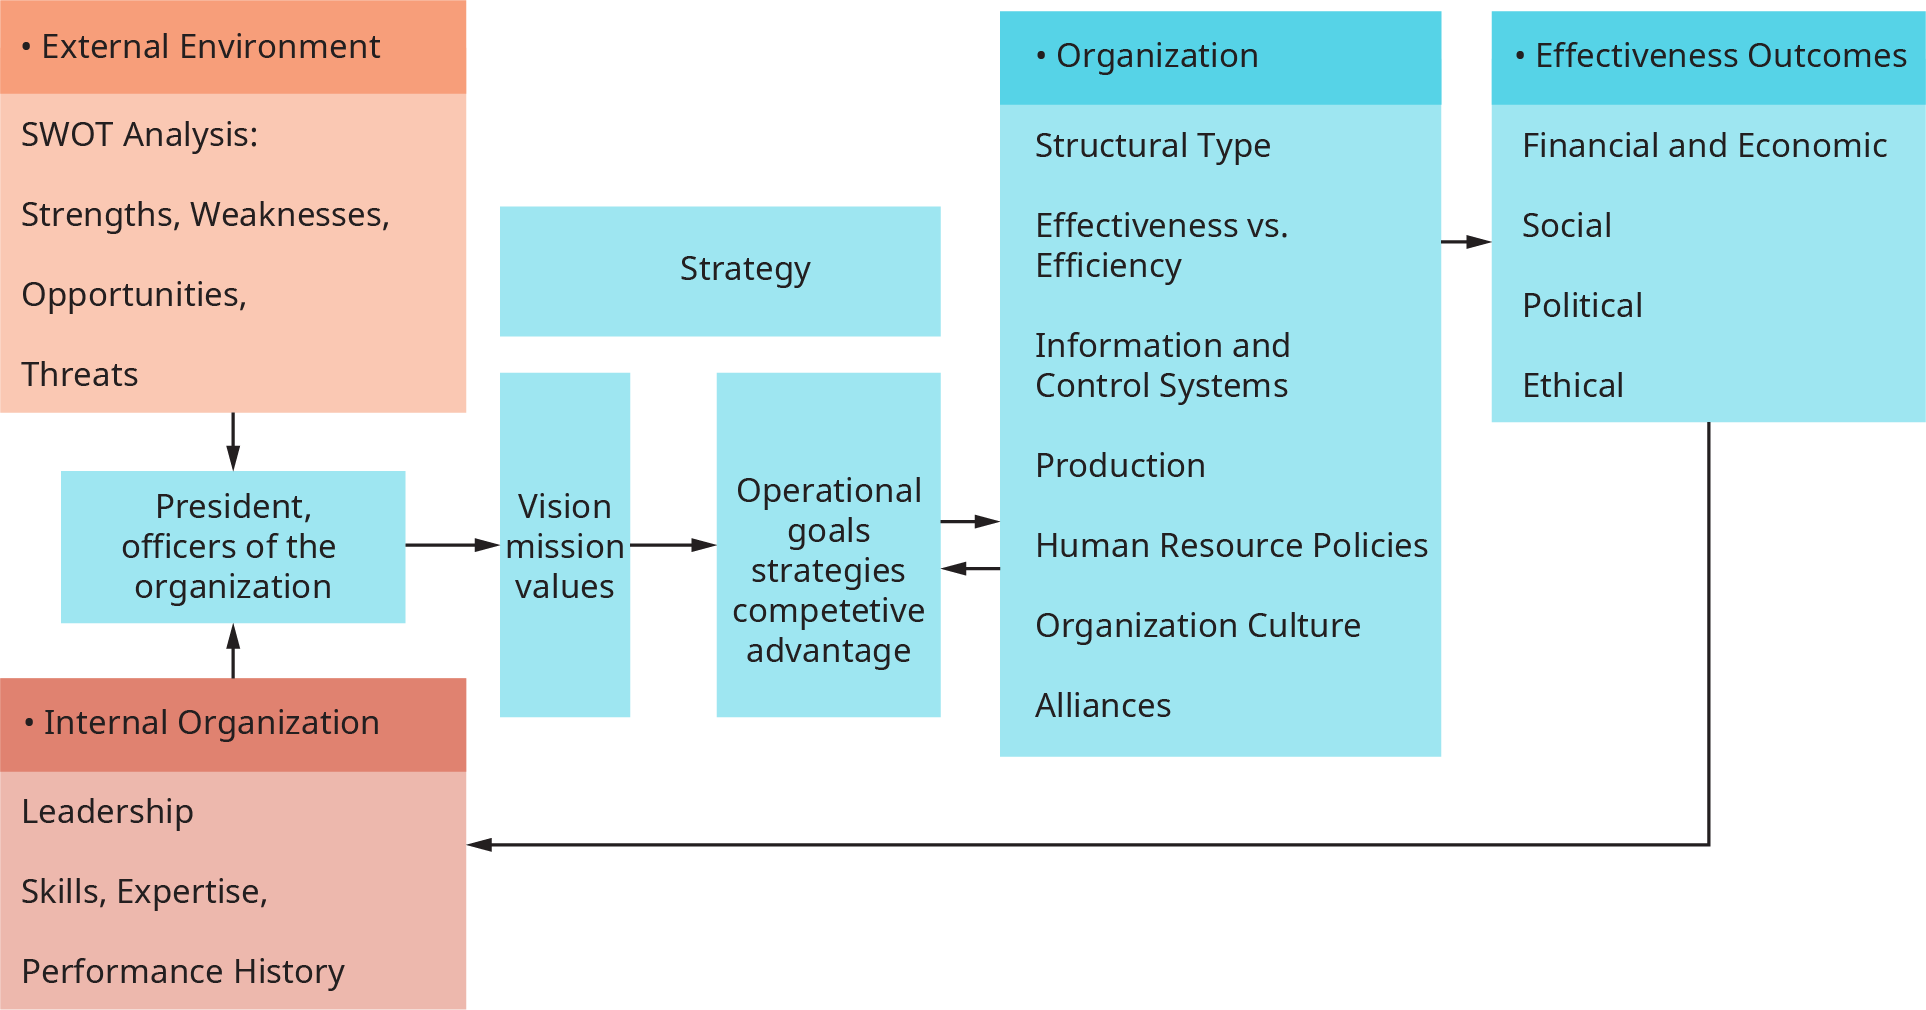 A diagram illustrates the integration of the internal environment and the external environment of an organization.